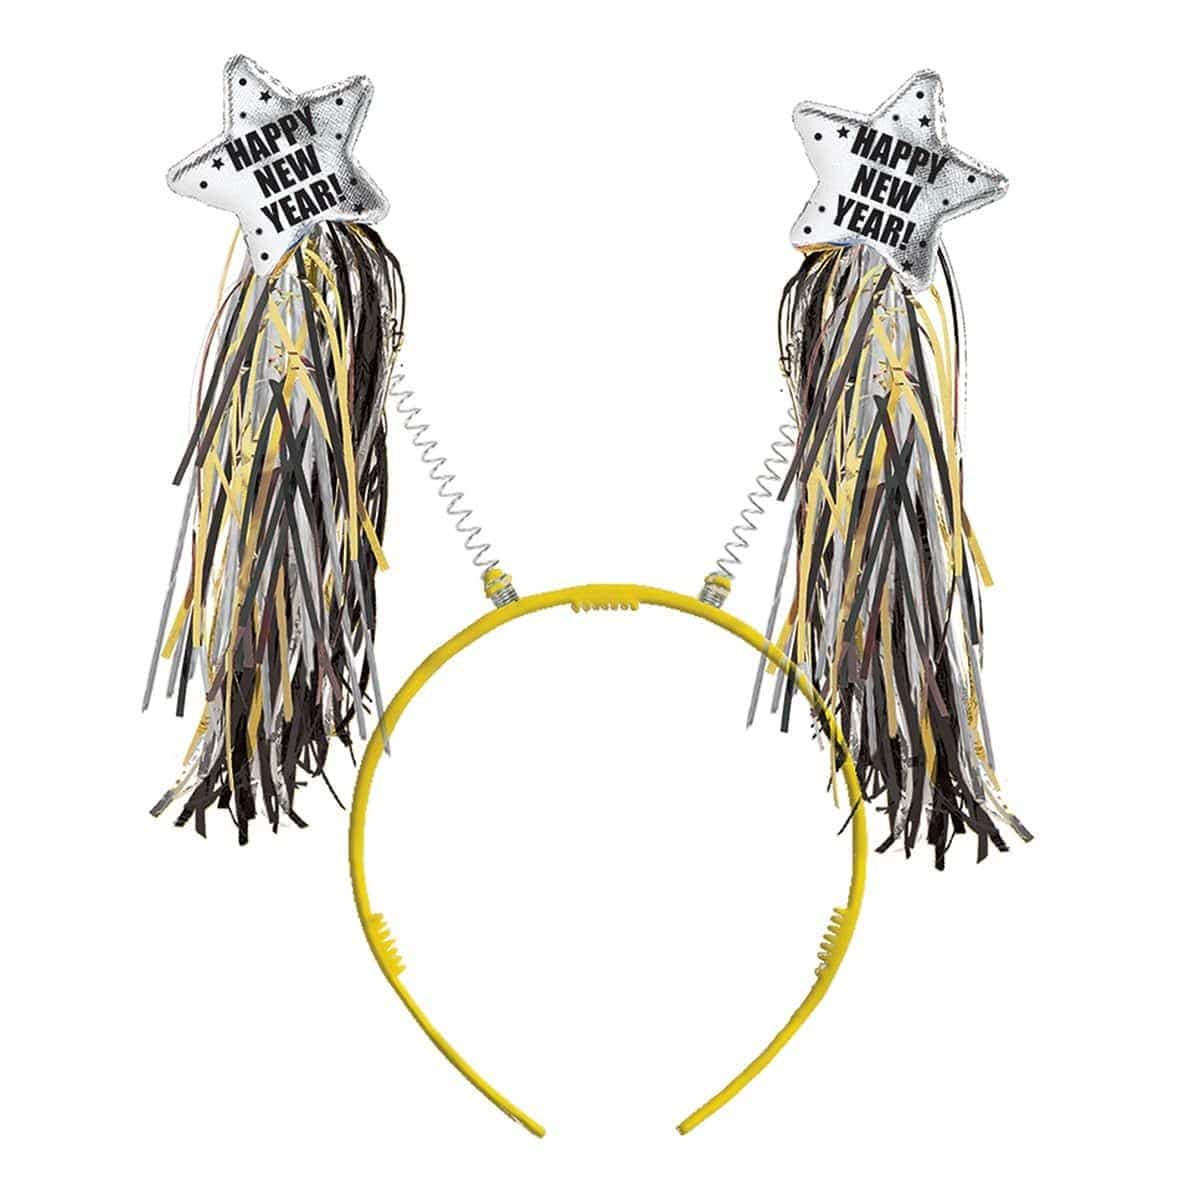 Buy New Year New Year Tinsel Headbopper - Gold sold at Party Expert